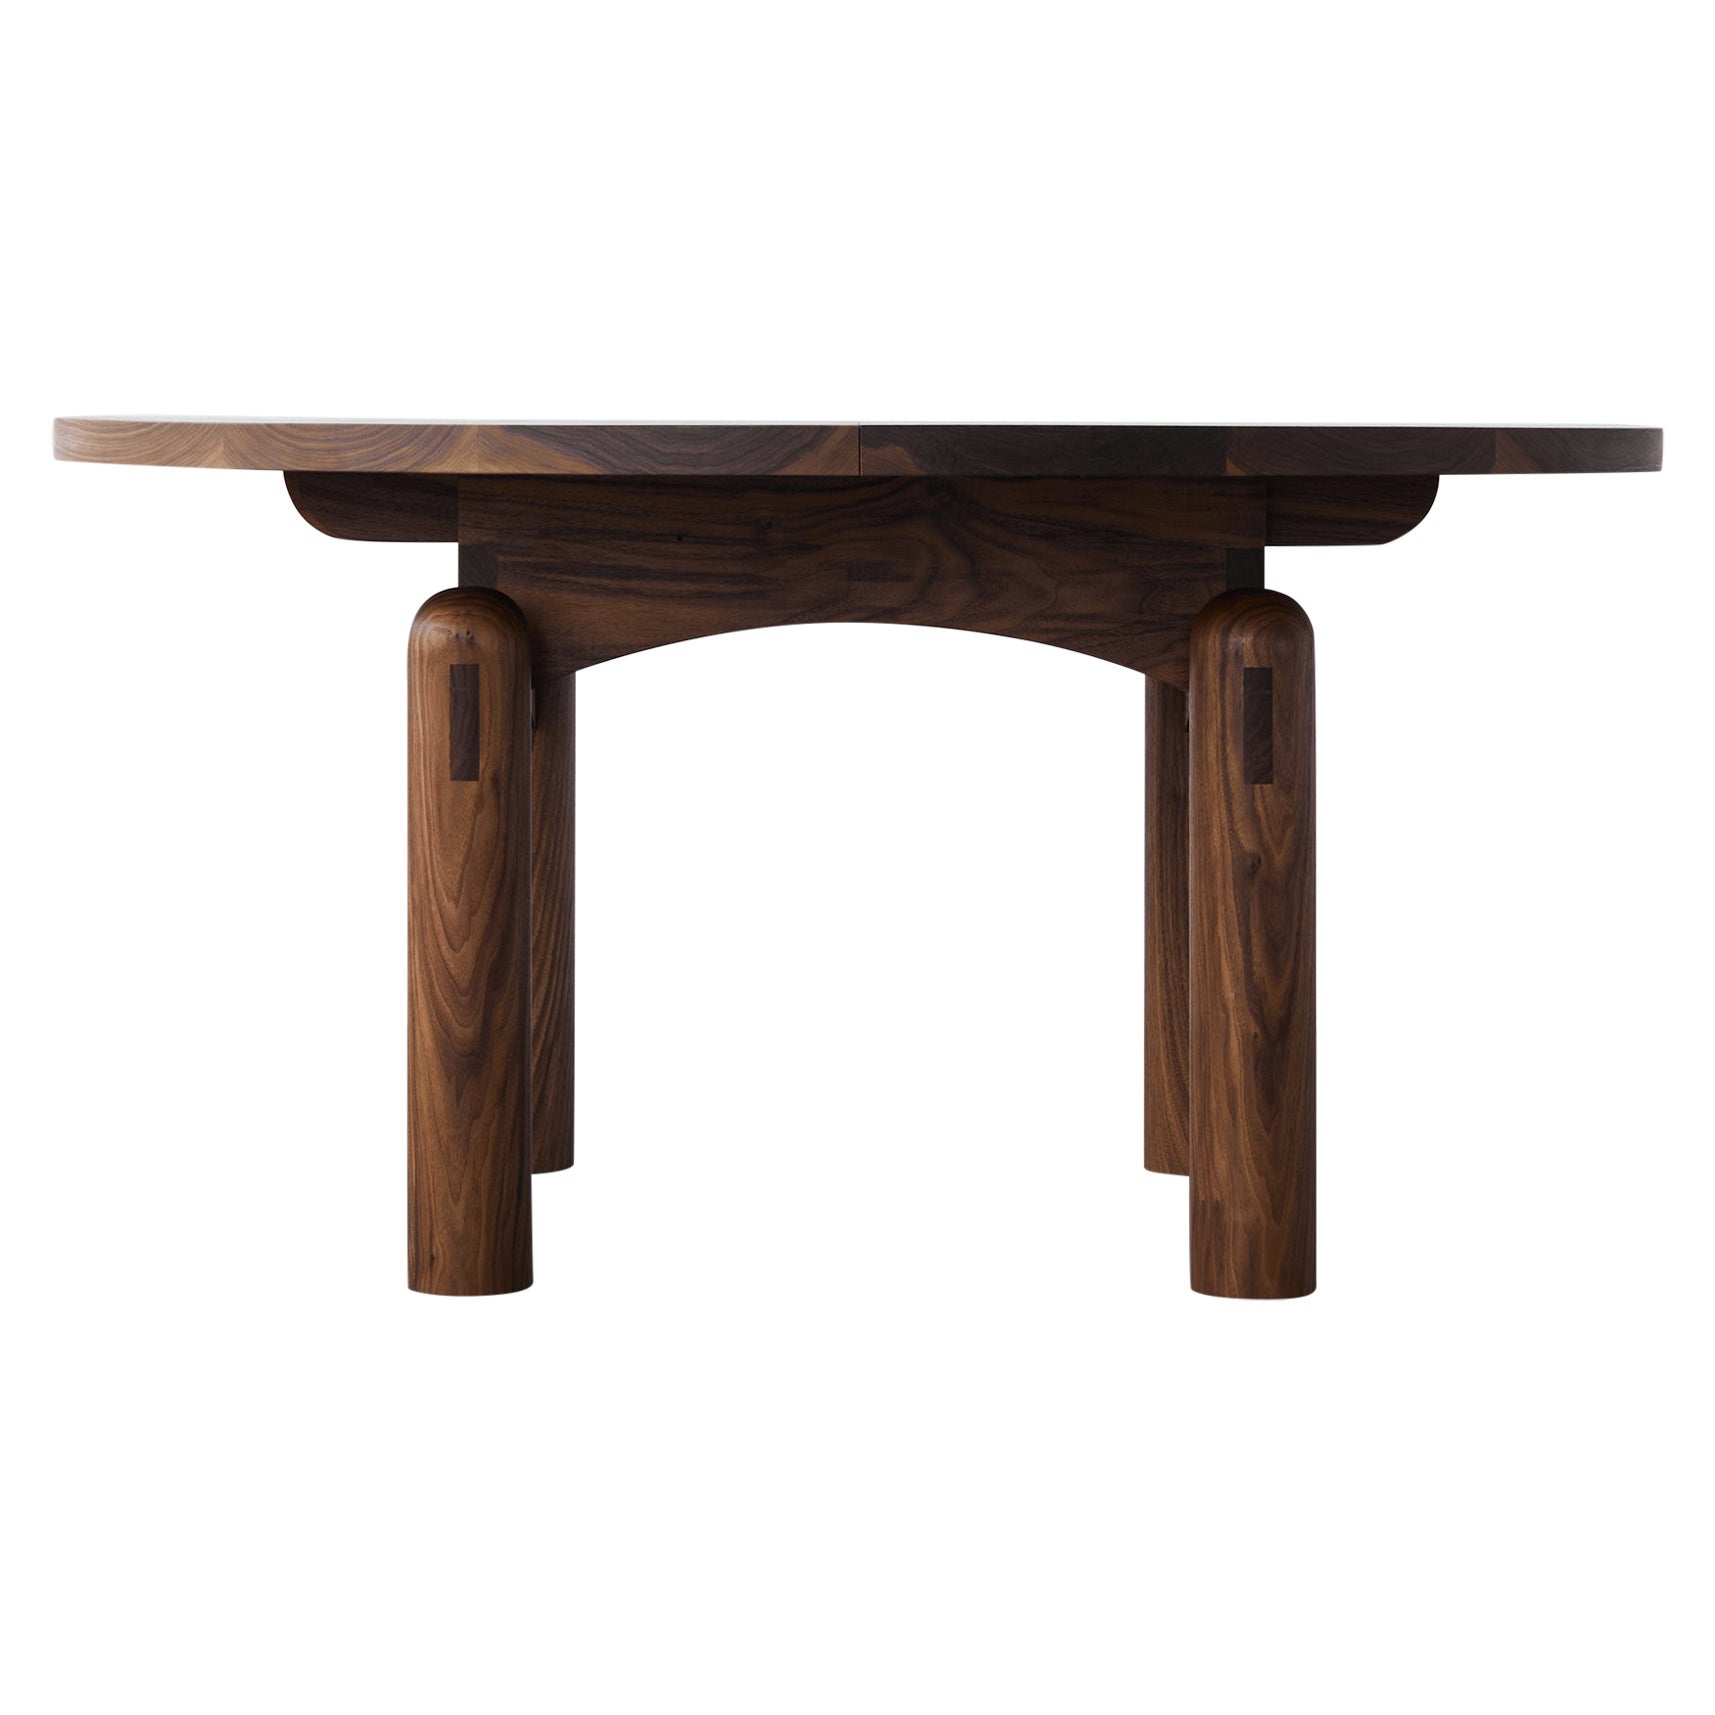 Handmade Nora Dining Table, Fixed Ø150cm - Walnut - by BACD studio For Sale